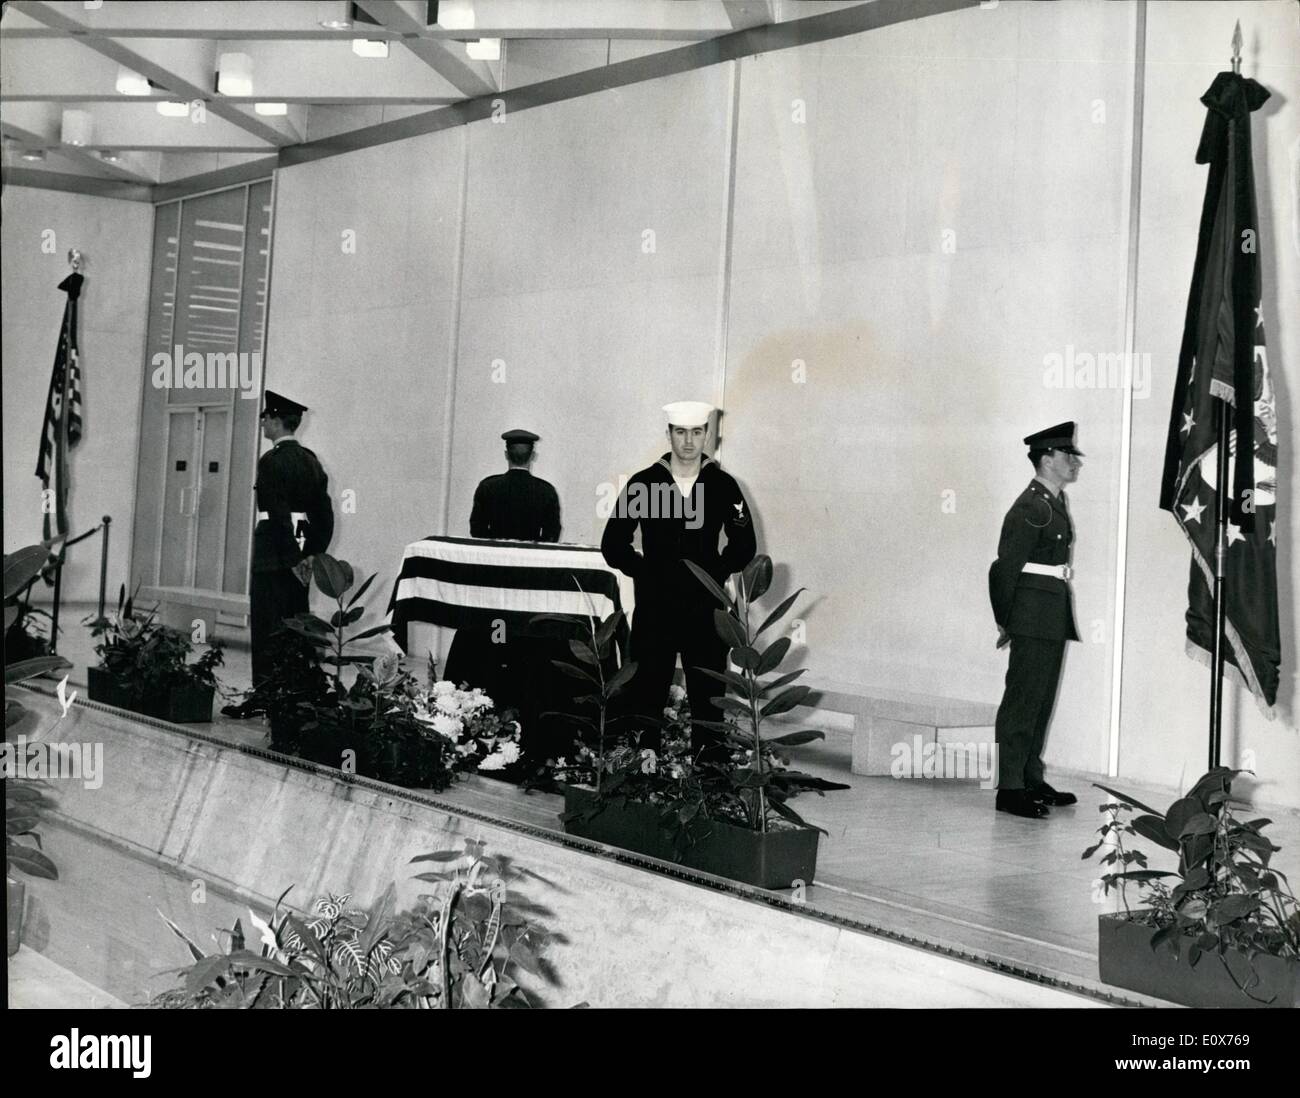 Jul. 07, 1965 - Death of Adlai Stevenson. Mr. Adlai Stevenson, America's Ambassador to the United Nations, who was in London on a private visit, died in a London street last night. He collapsed near the U.S. Embassy in Grosvenor Square. Keystone Photo Shows: The coffin containing the body of Adlai Stevenson lying in the U.S. Embassy today, with British and American Servicemen on guard. A special delegation will take the body back to the U.S.A. H/Keystone Stock Photo